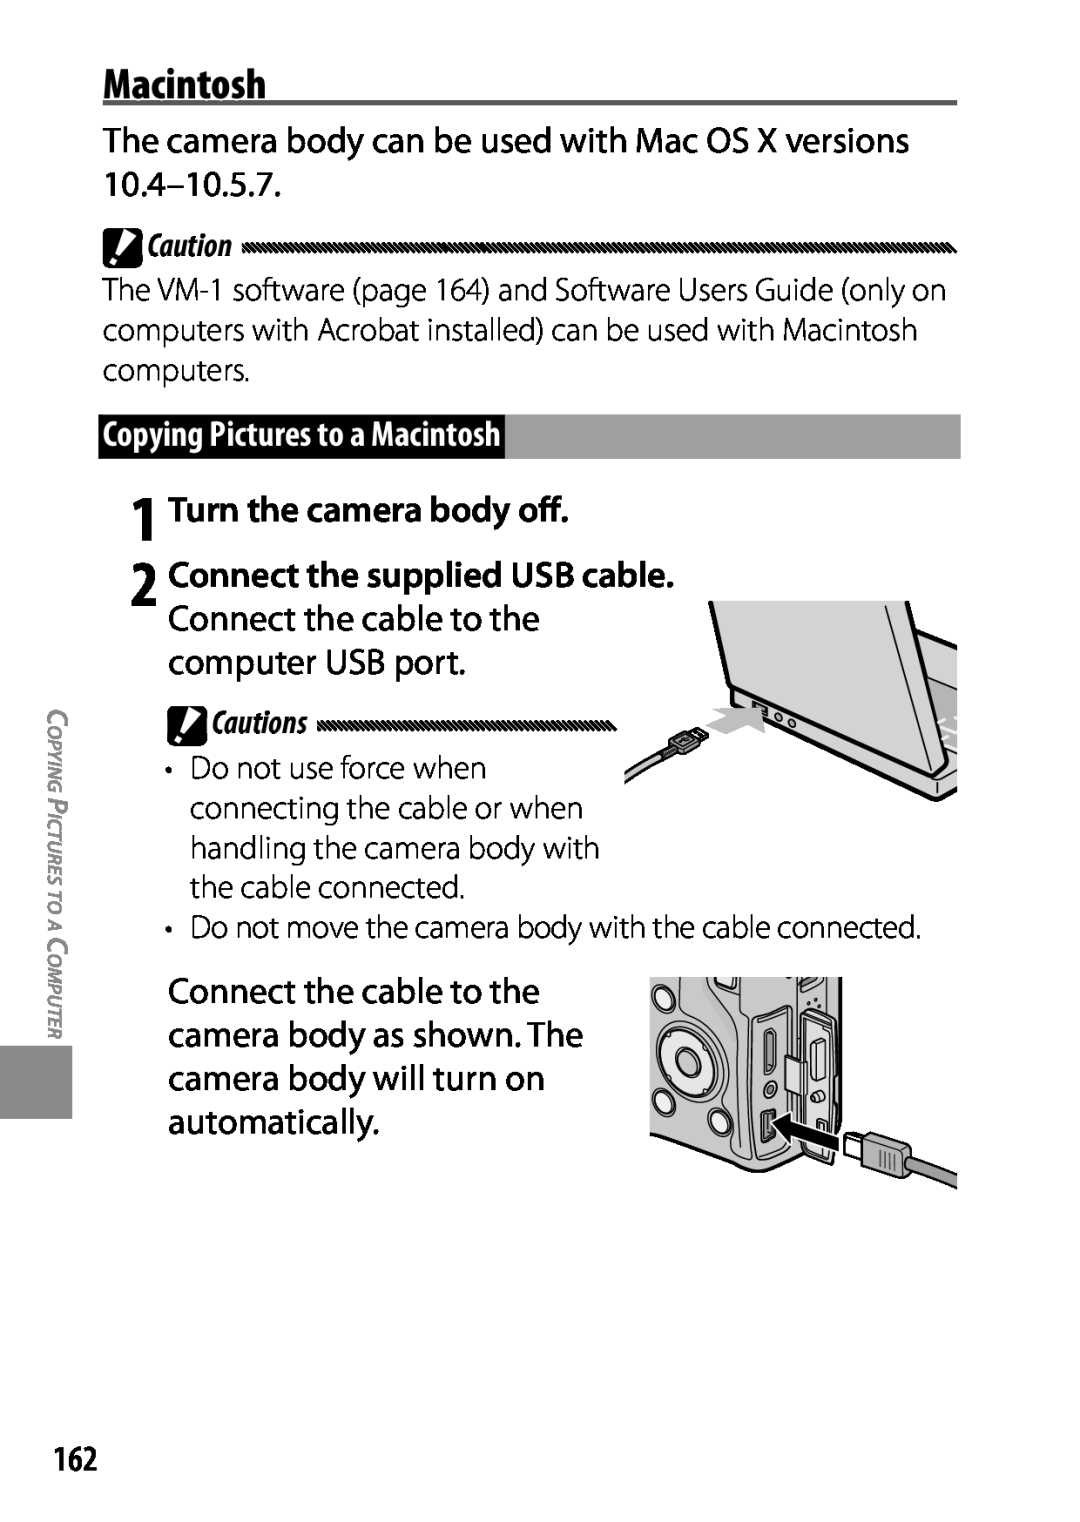 Ricoh GXR manual Copying Pictures to a Macintosh, 1 Turn the camera body off, Cautions, pCo ying Pictures to apCuterom 